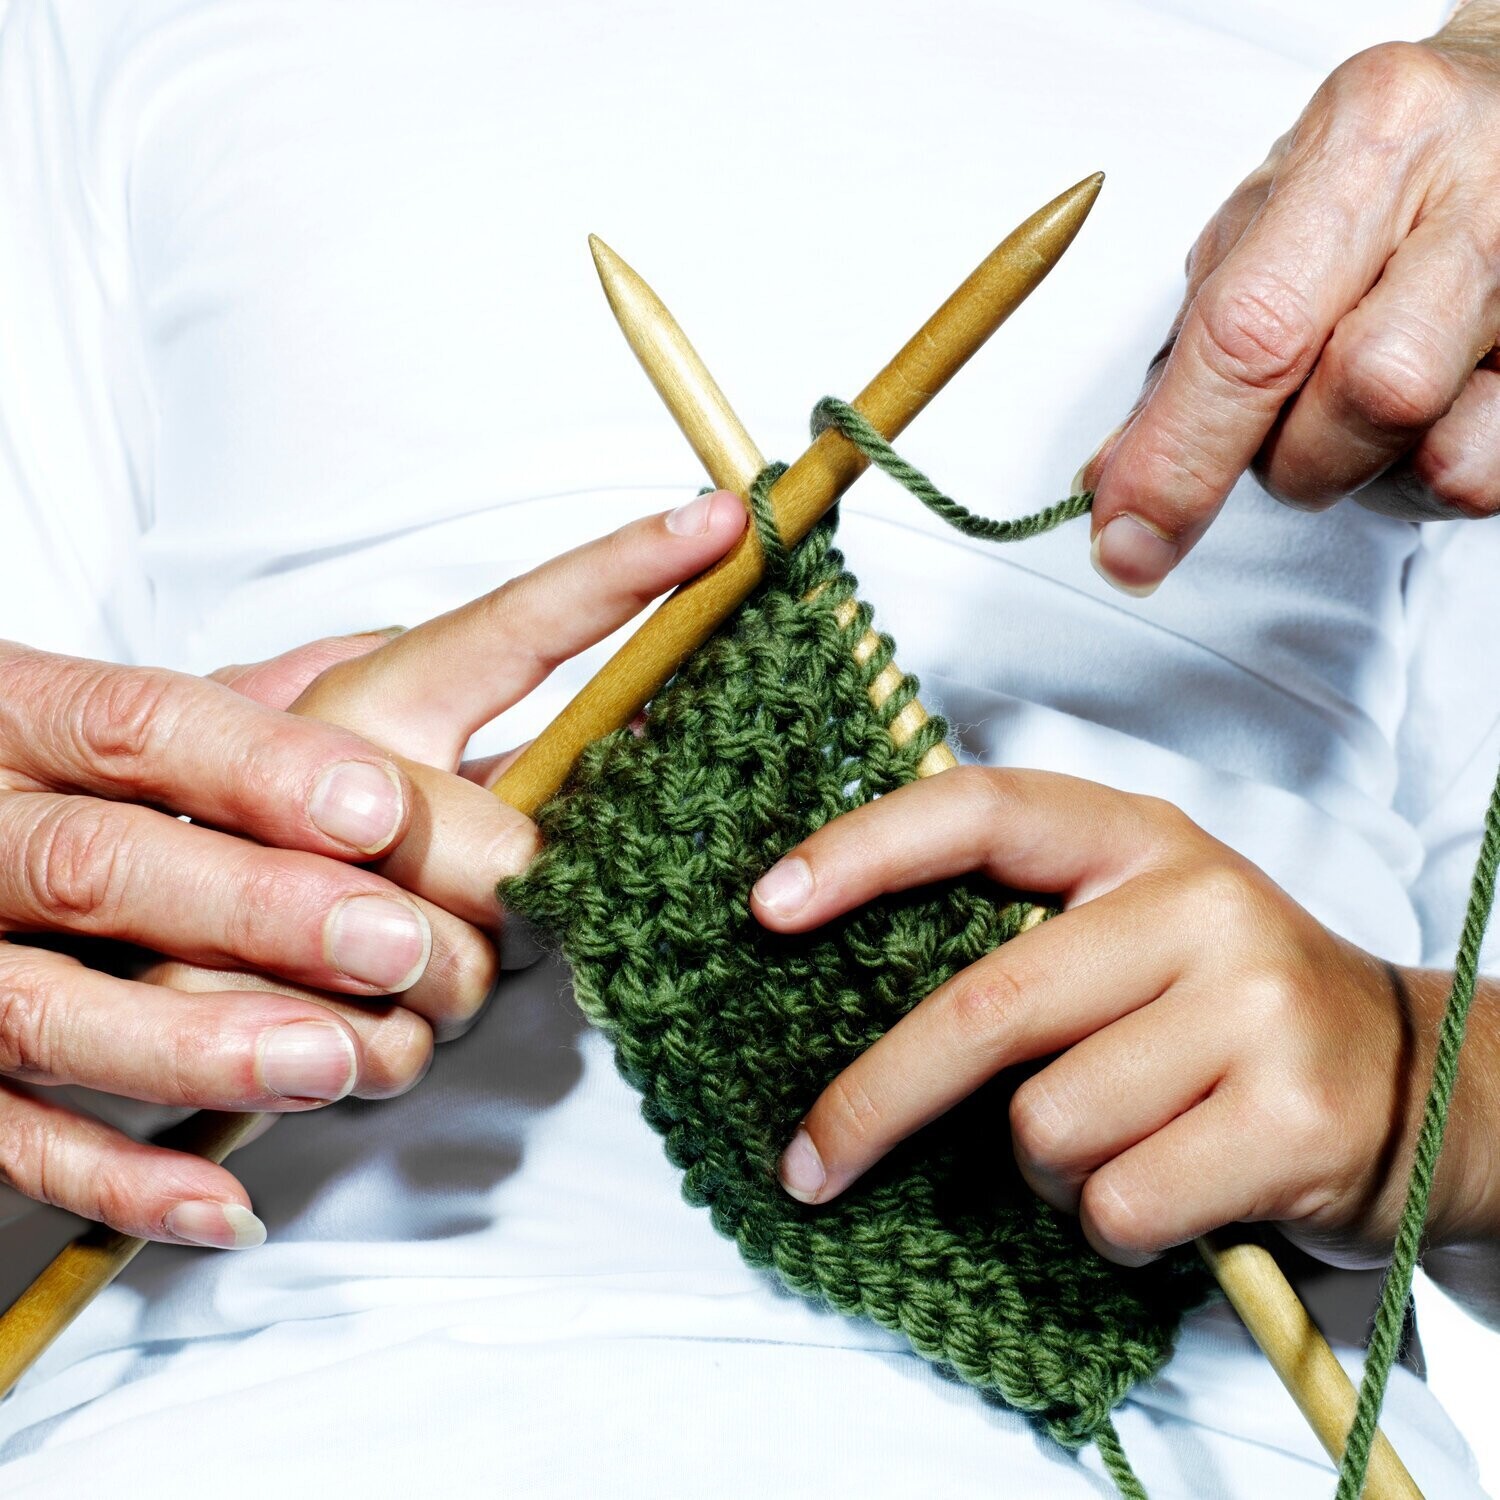 Weekly Knit & Natter (FREE) :-
Tuesdays 10.30-12pm